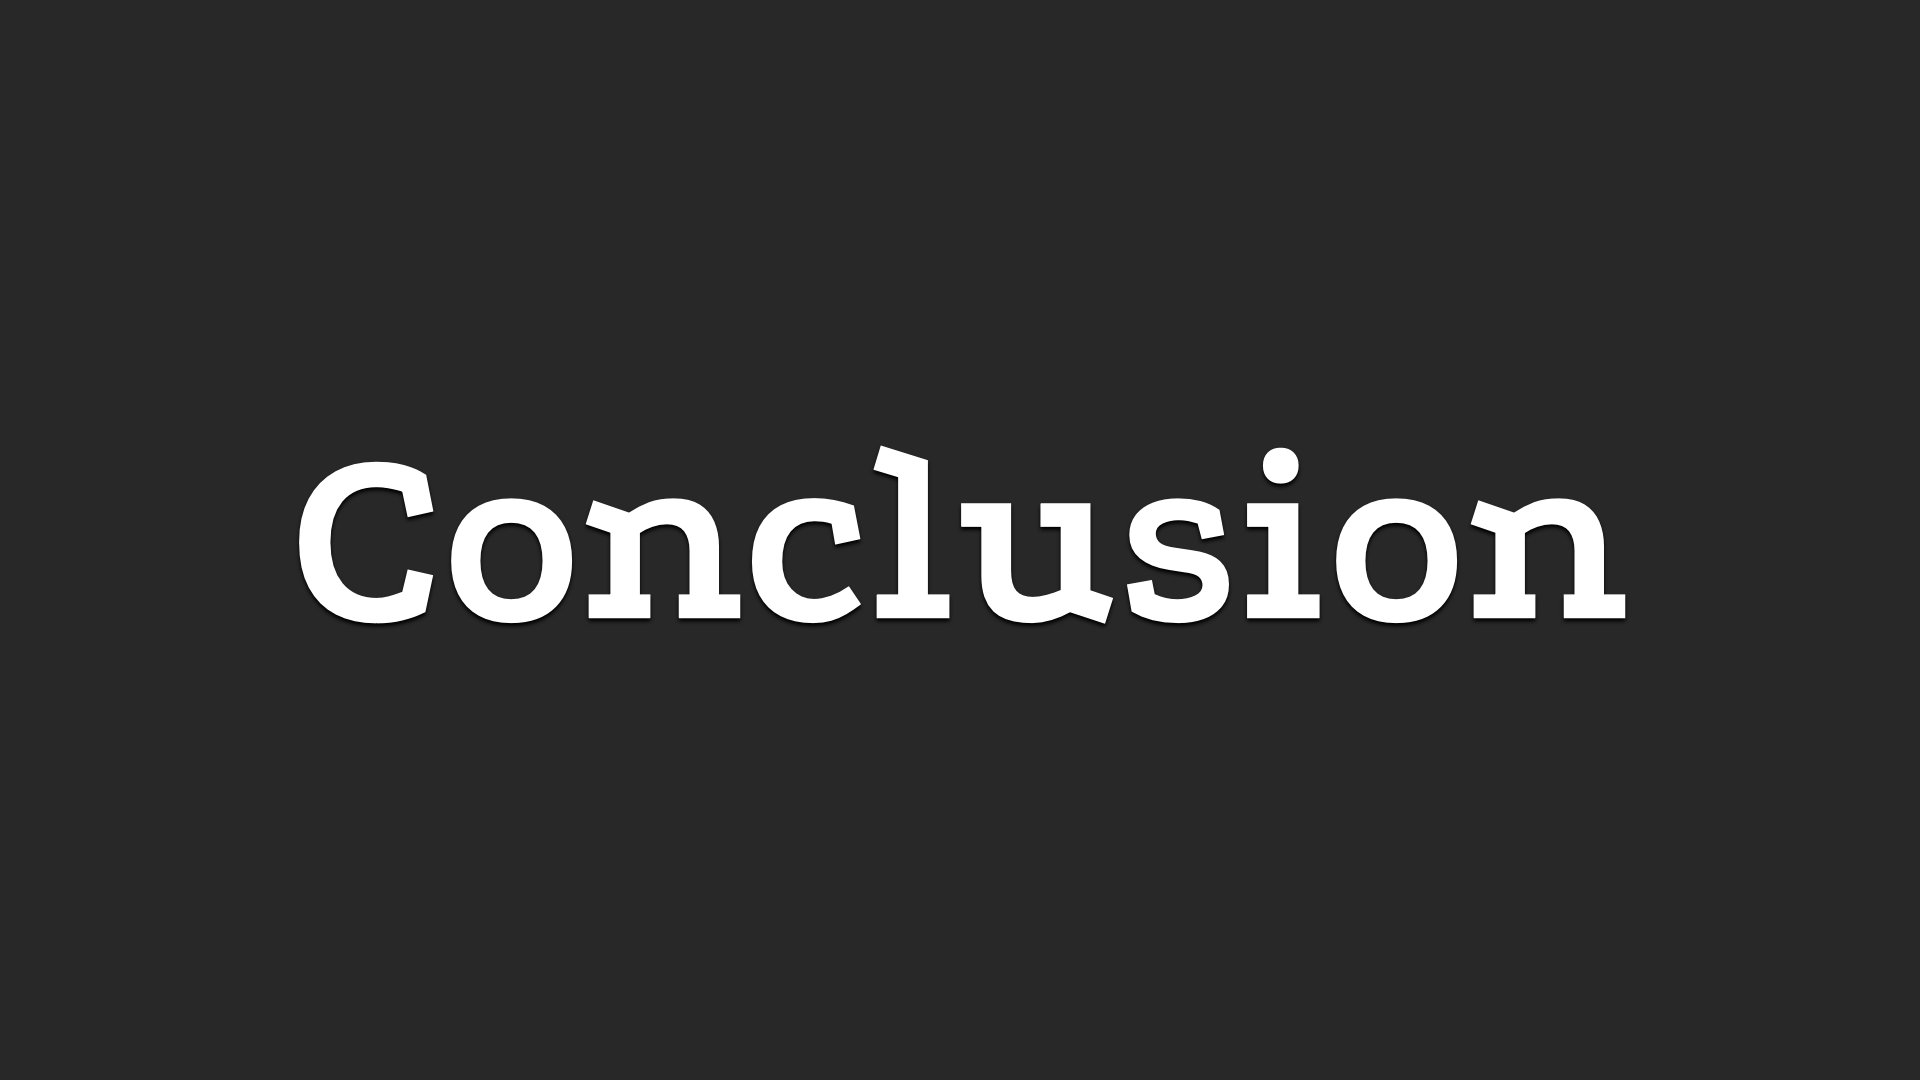 Text in giant letters: 'Conclusion'